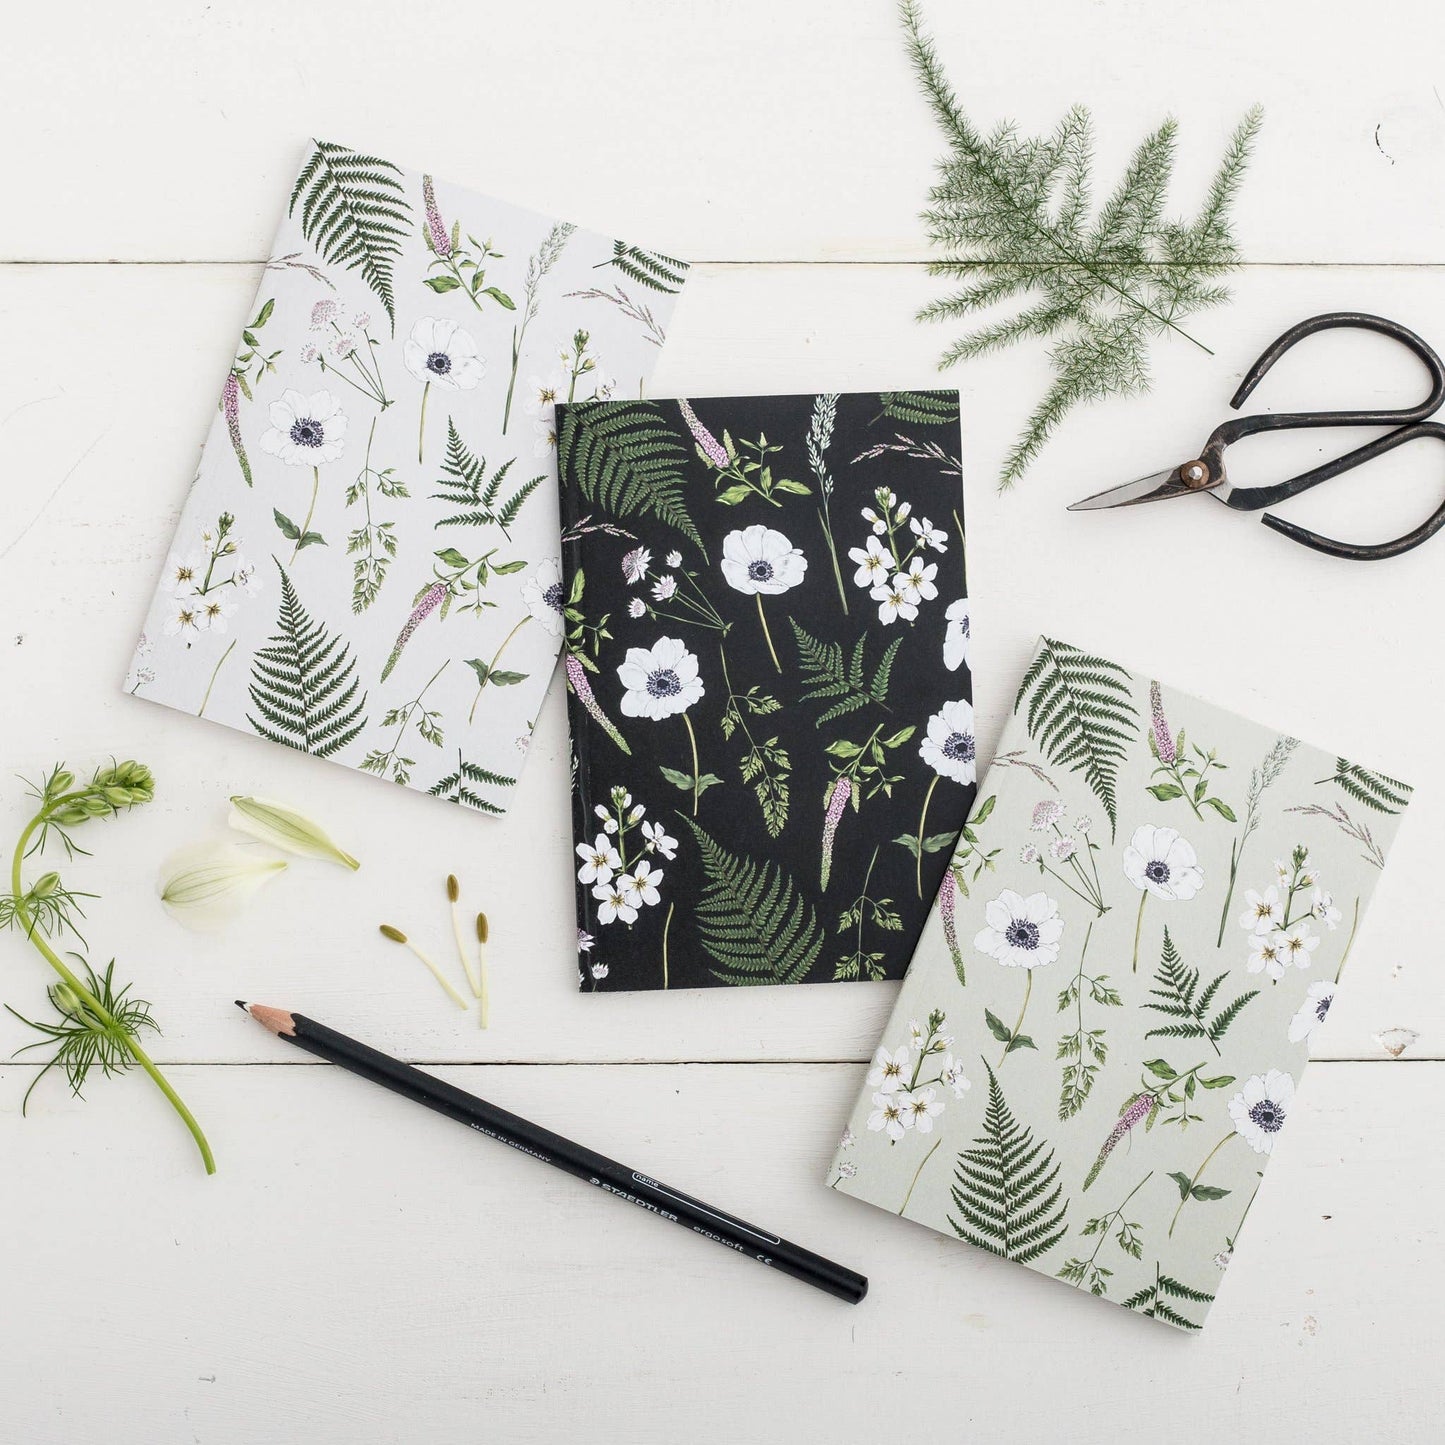 Catherine Lewis Design - Wild Meadow - Pack of 3 A6 Notebooks